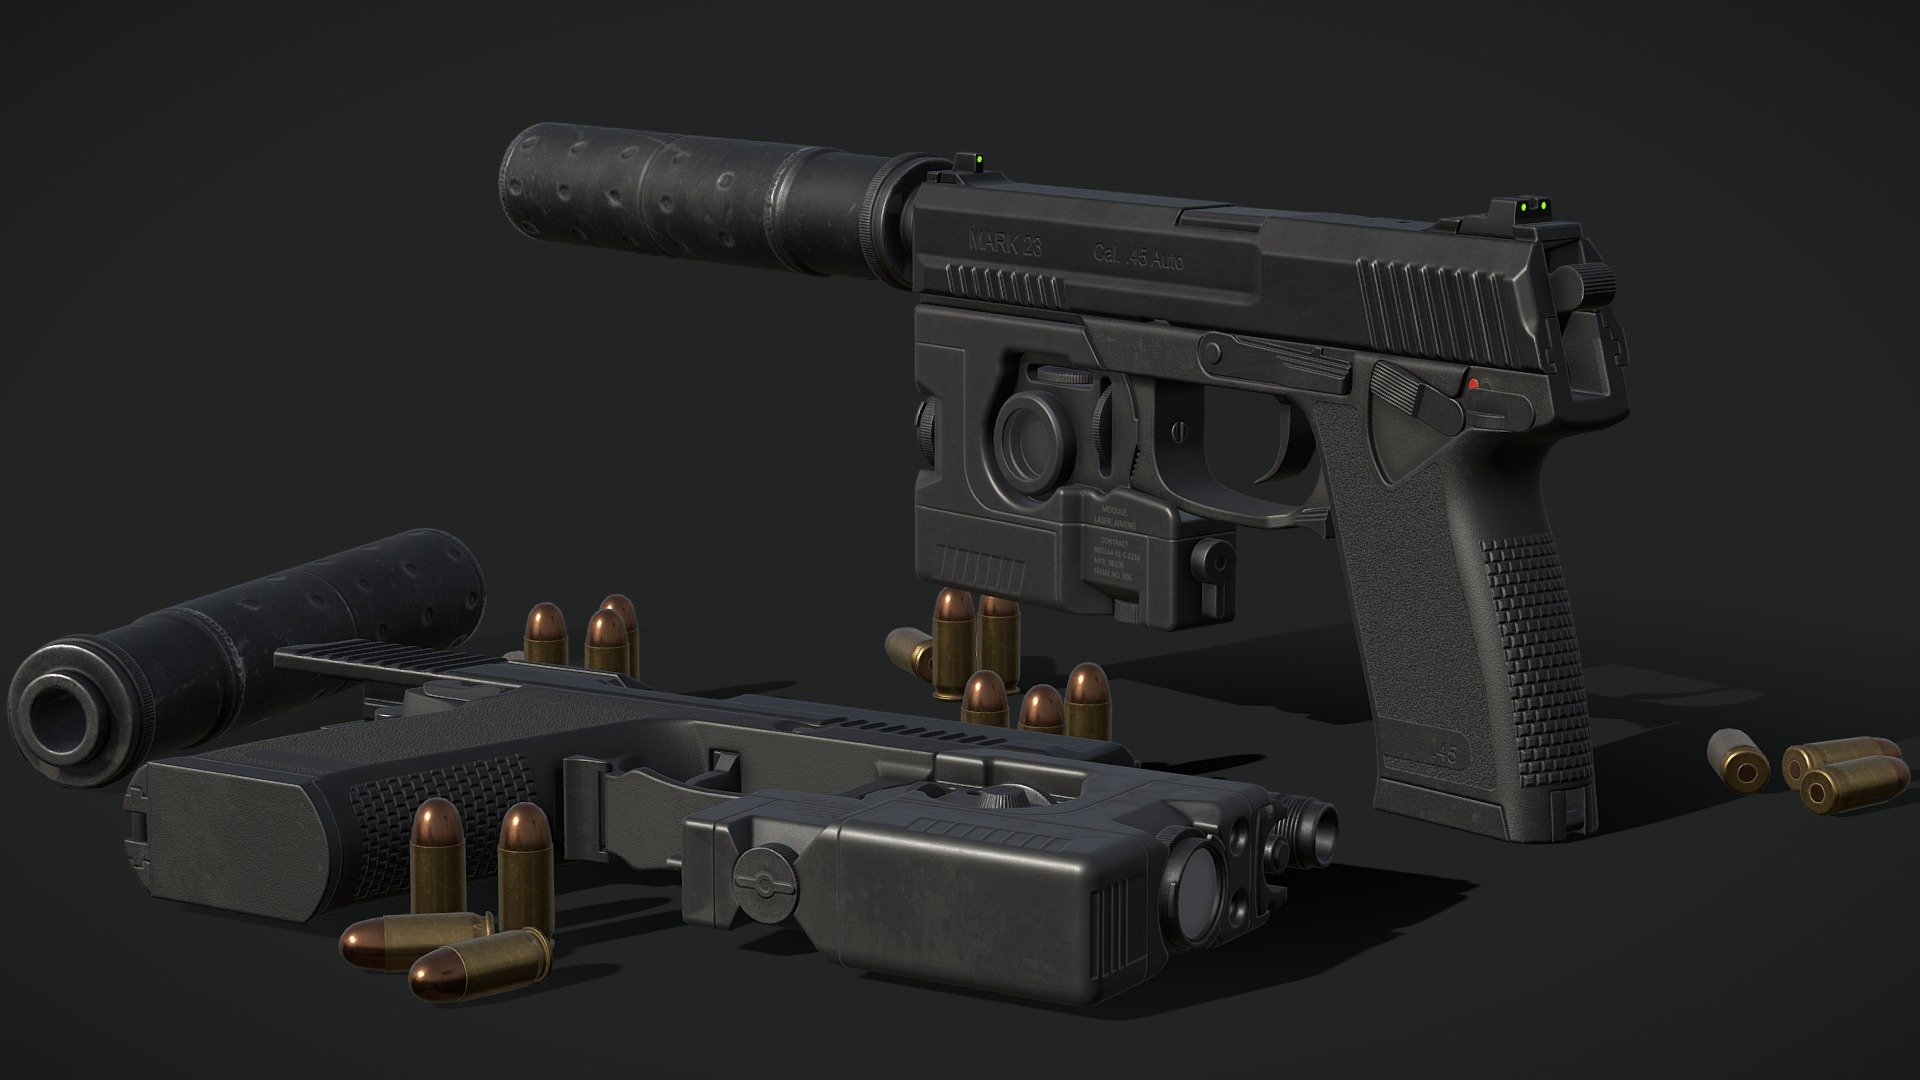 Parts are separated to ease rigging. Parts include




Frame

Barrel

Magazine

Magazine release

.45 Cartridge

Hammer

Cocking lever

Safety

Suppressor

Laser Aiming Module

Trigger

Slide stop

Textures included:




4K, 2K gun textures

2K, 1K attachments textures

Unreal packed textures

4K gun 2K attachment baked textures for custom texturing

Also comes with a blend file that includes the basemesh, lowpoly and highpoly 3d model